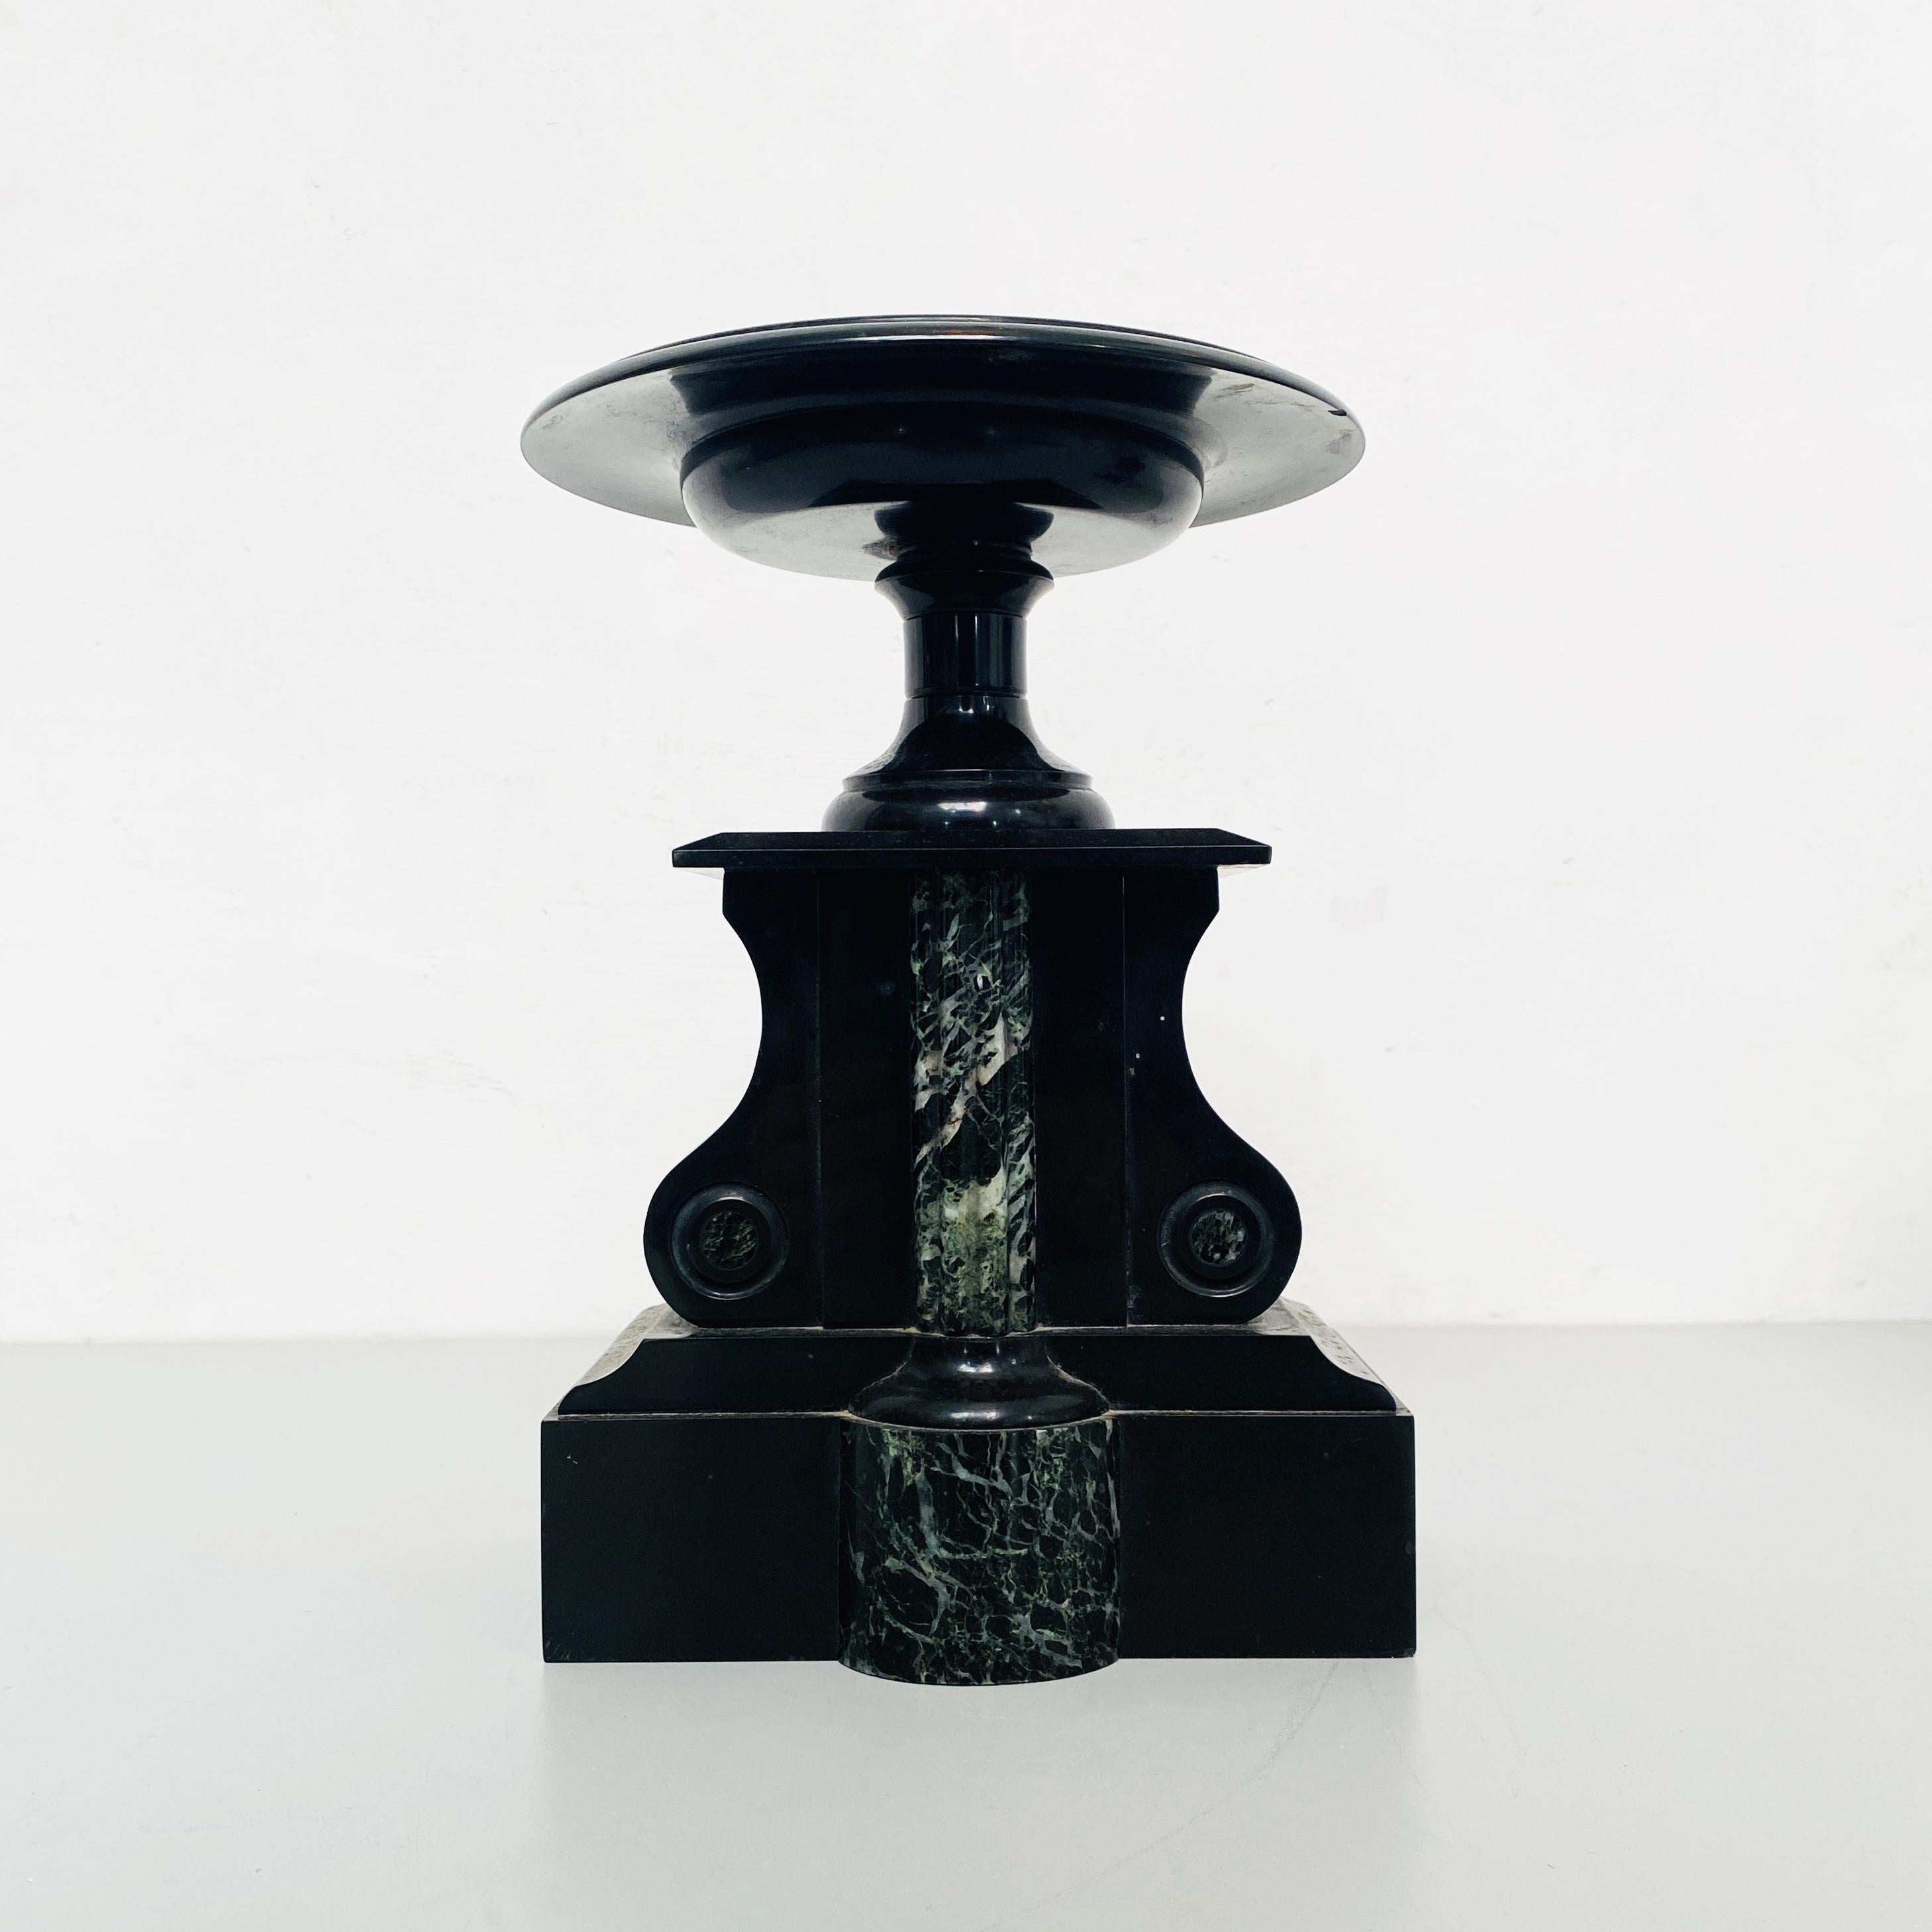 Italian Art Deco Black Onyx Centerpieces with Shape of a Balance, 1940s For Sale 7